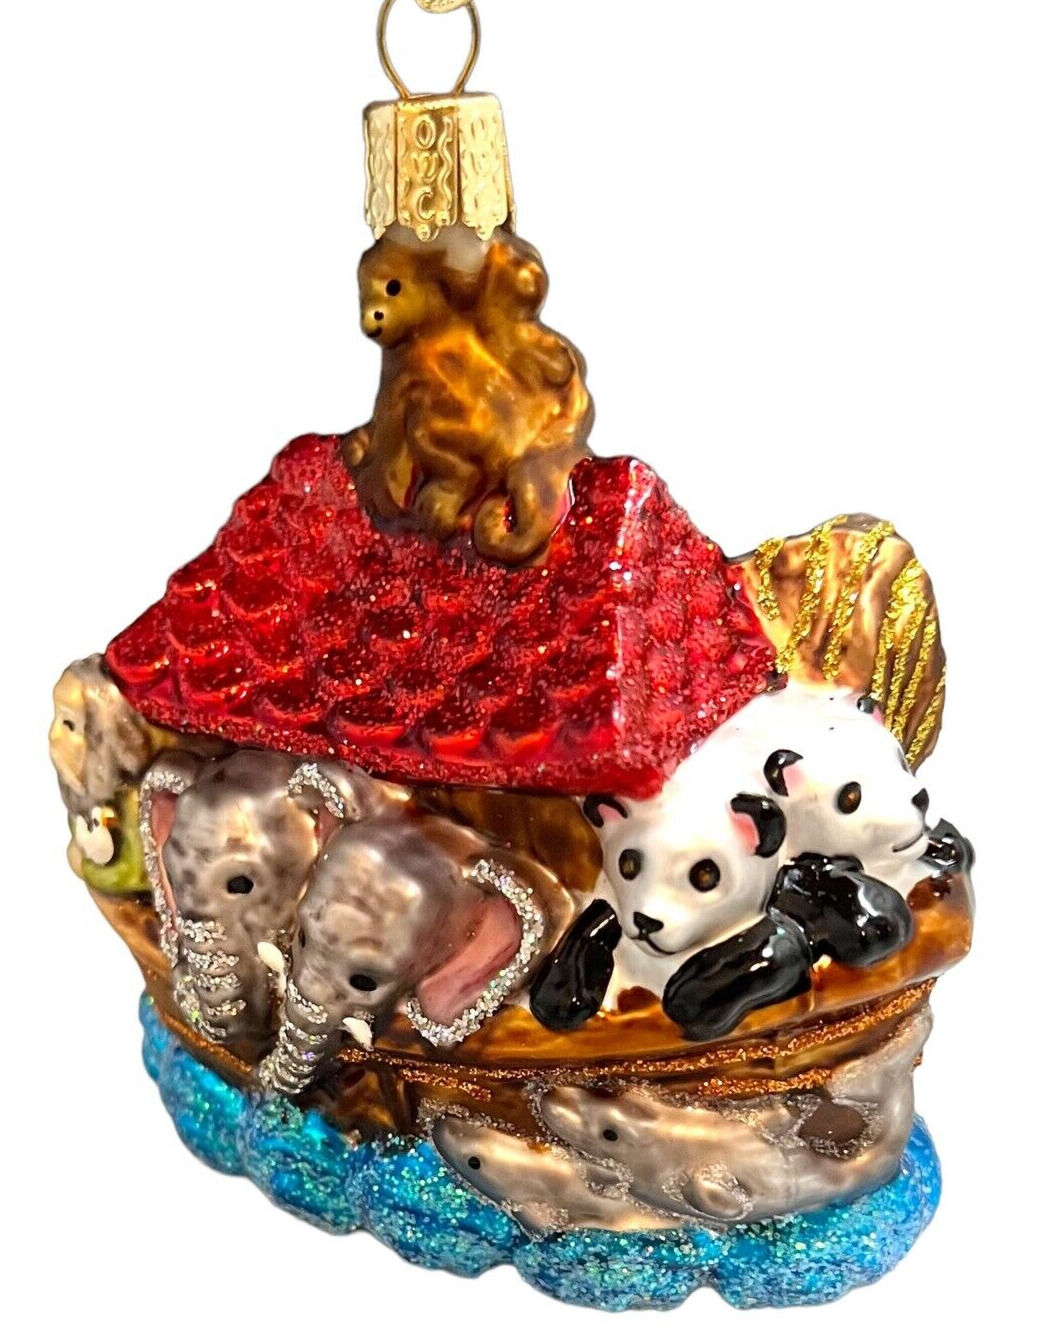 Noah’s Ark Old World Christmas Blown Glass Ornament OWC 4”x4.5” with Box